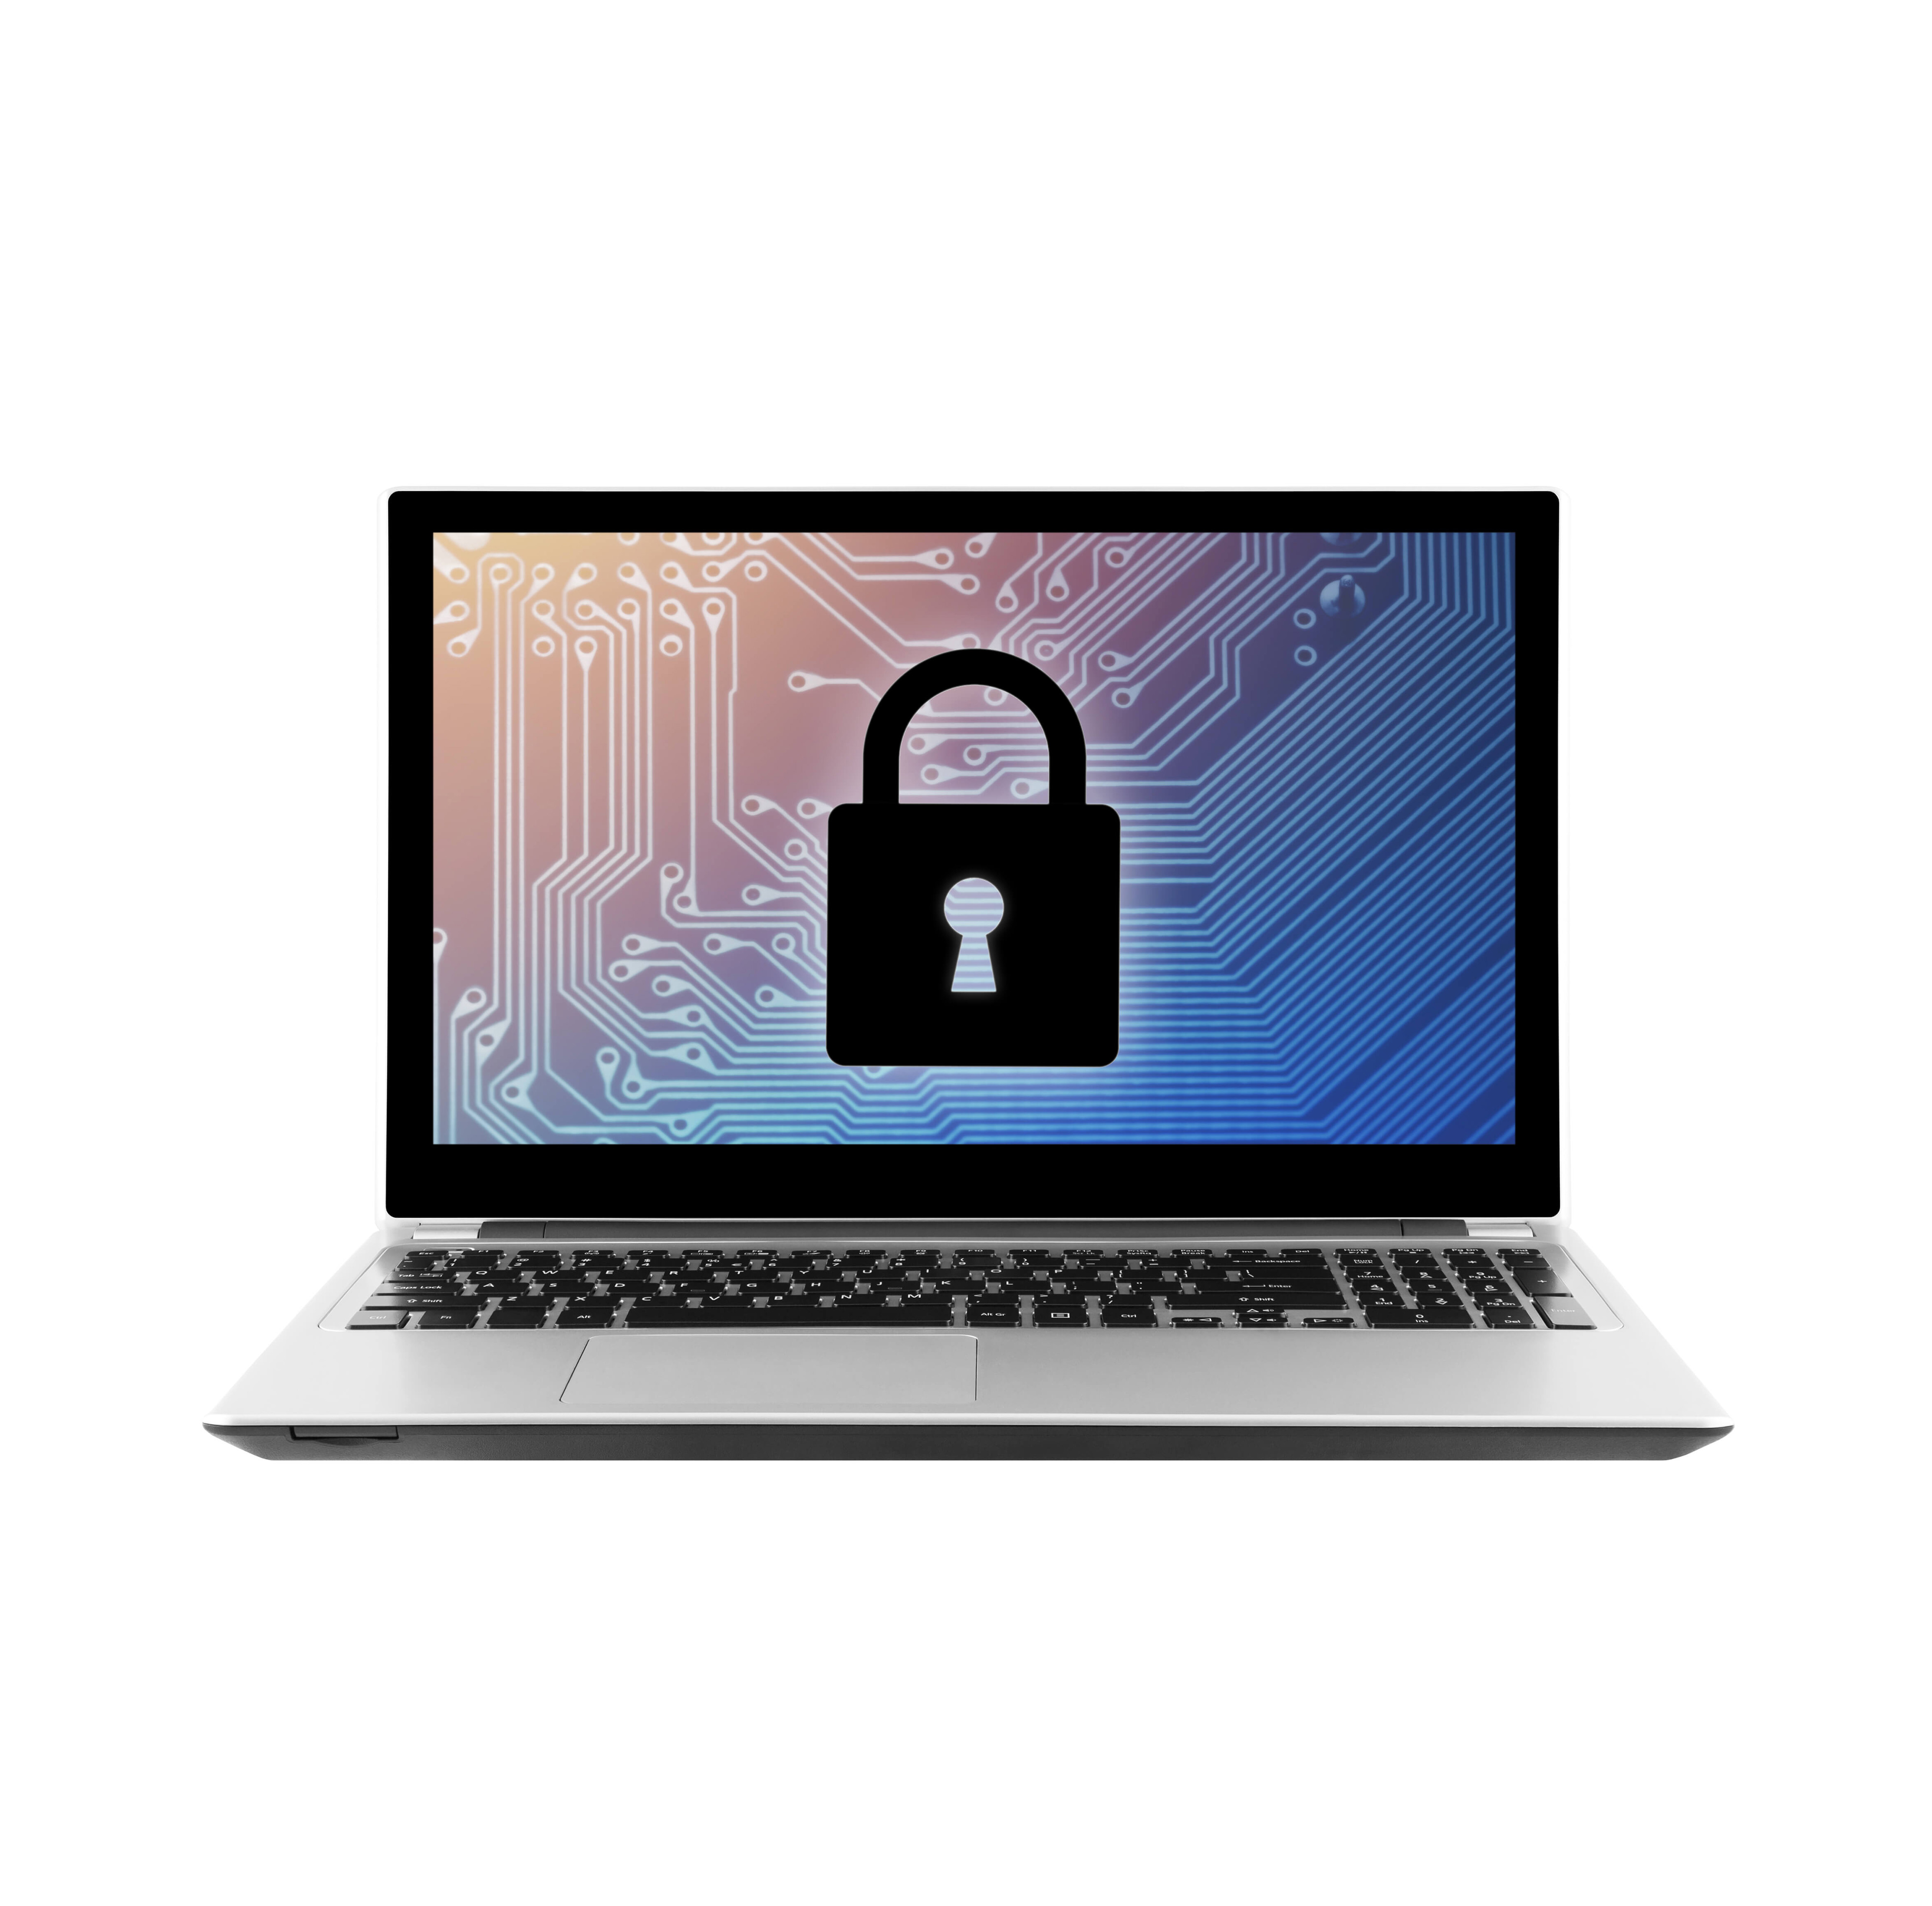 Laptop with a security lock on the screen